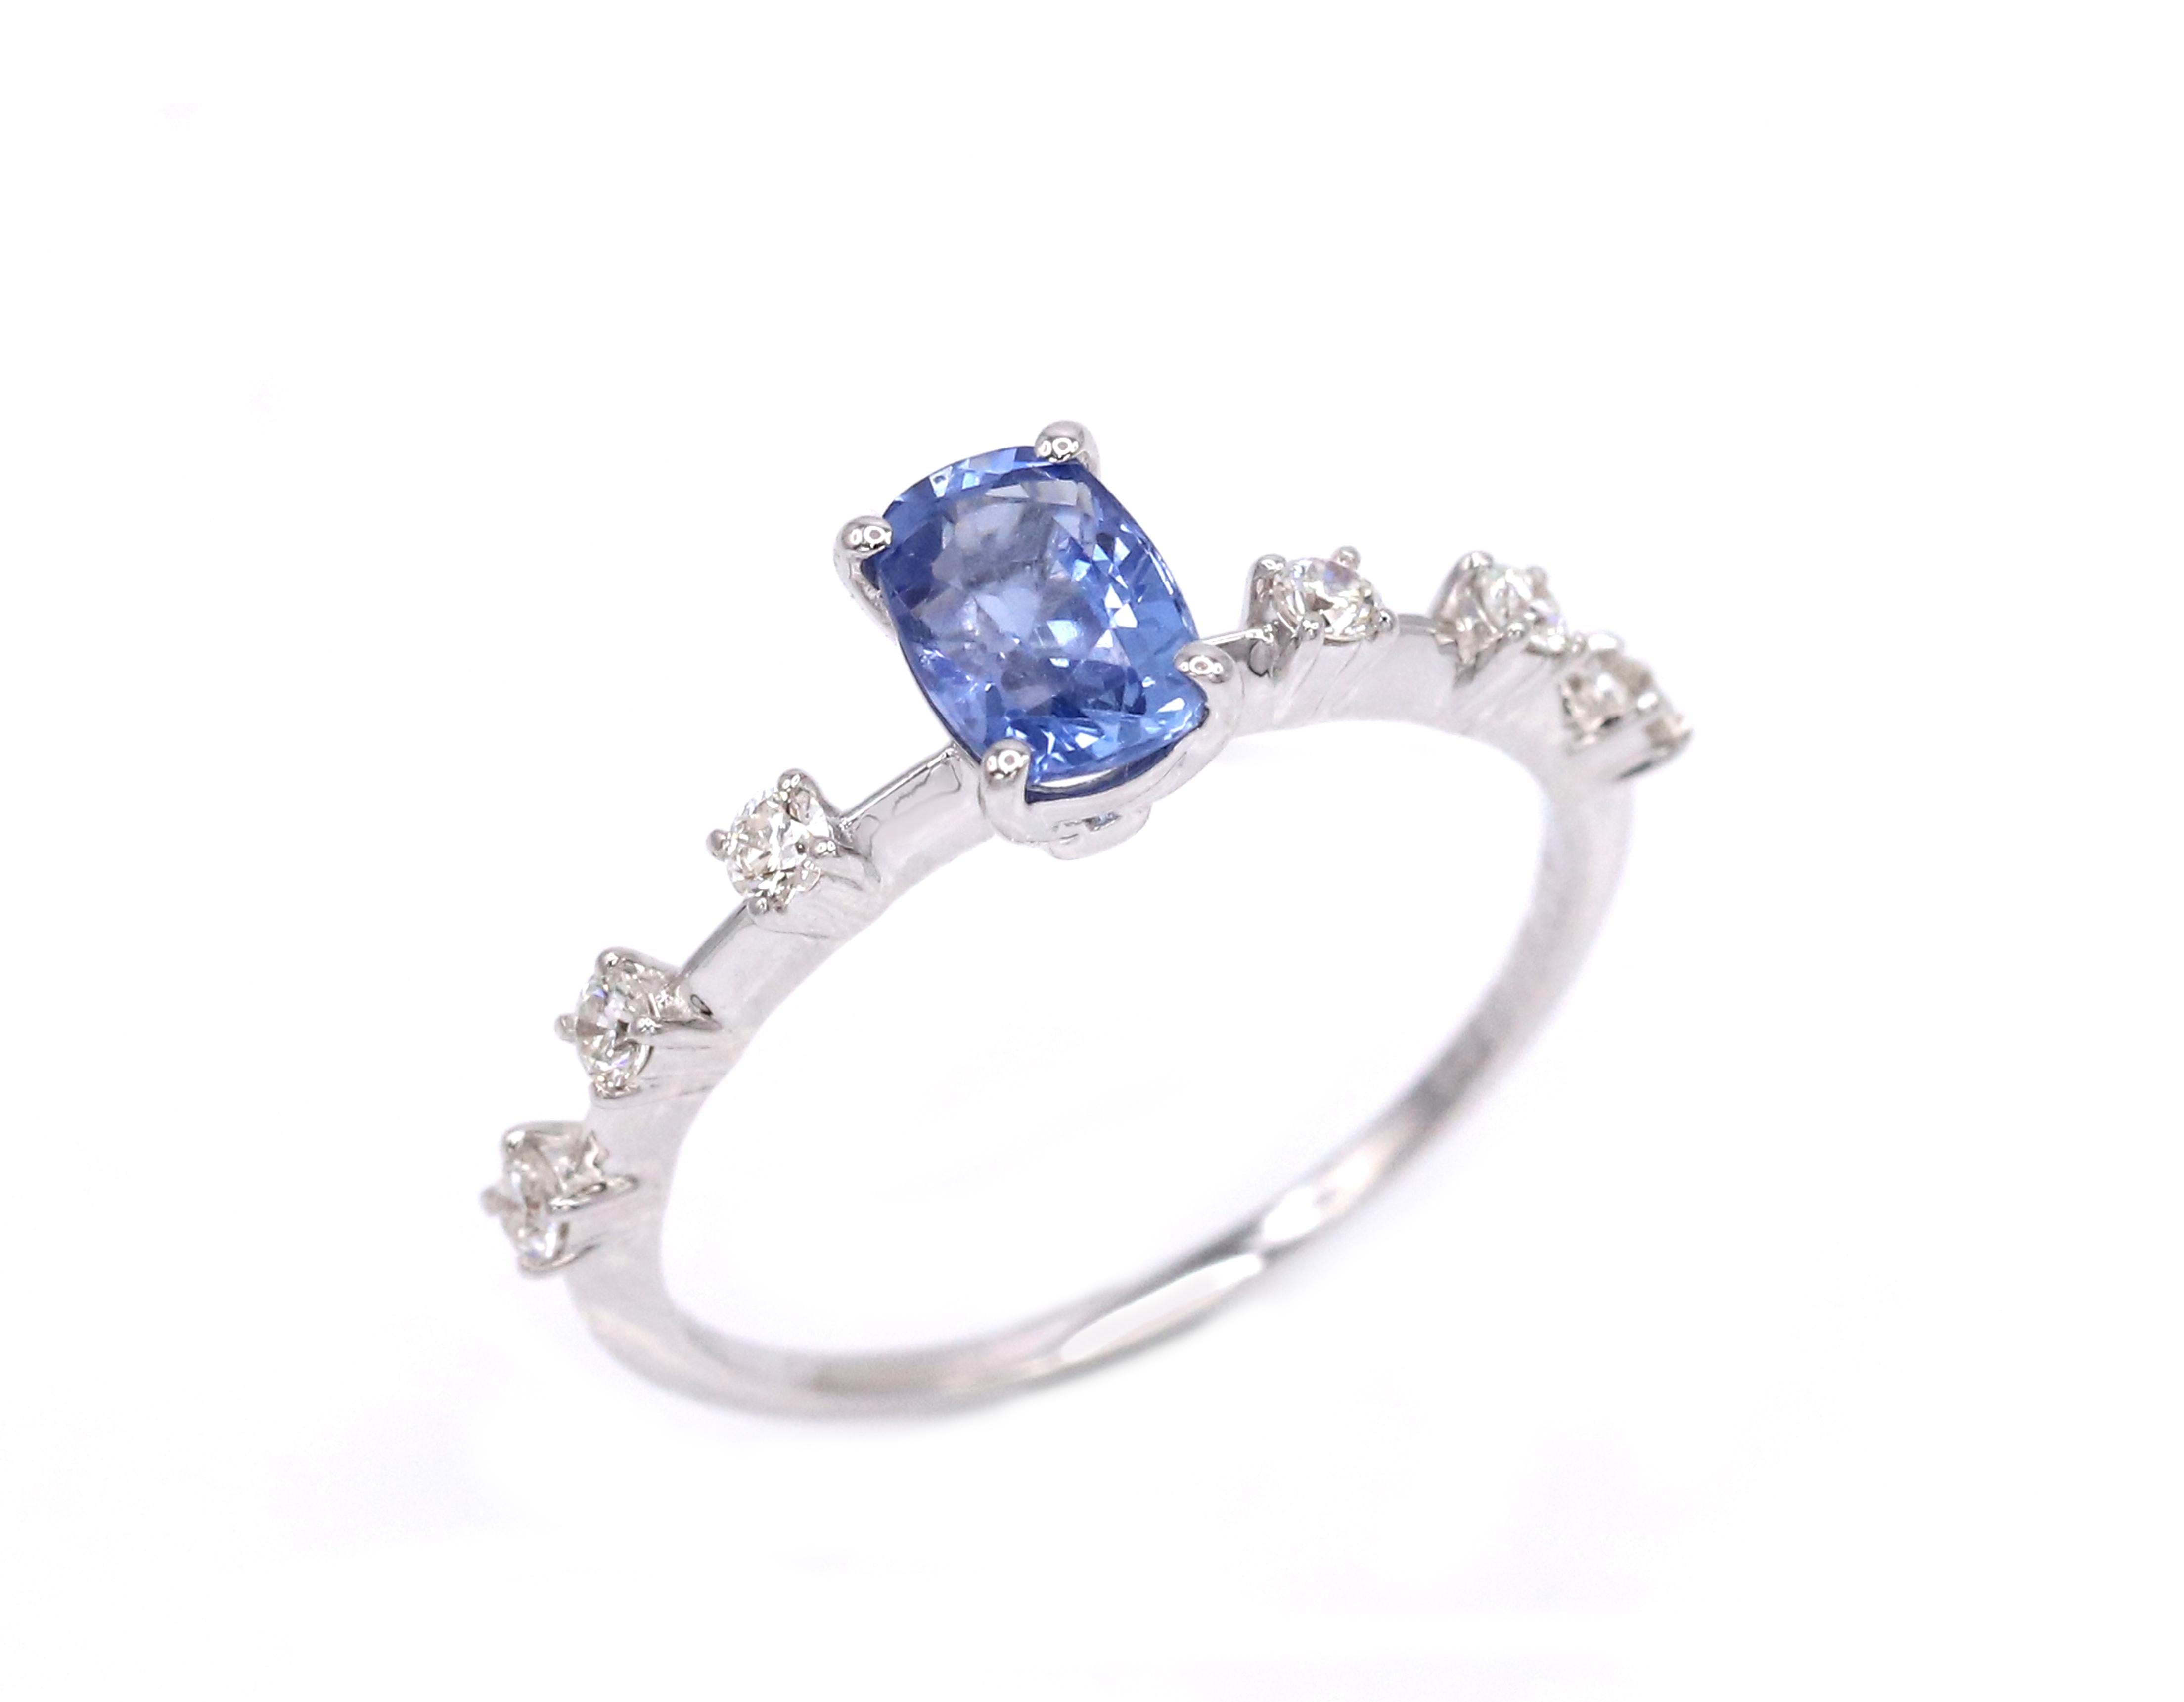 Flawless beautiful timeless 1.12 Carat Blue Sapphire Diamond 18K White Gold Ring.
Can be offered like an engagement ring as well as cocktail ring.

0.95 ct Blue Untreated Sapphire, Origine Sri Lanka
6 white diamonds of total weight 0.17 ct,
18K